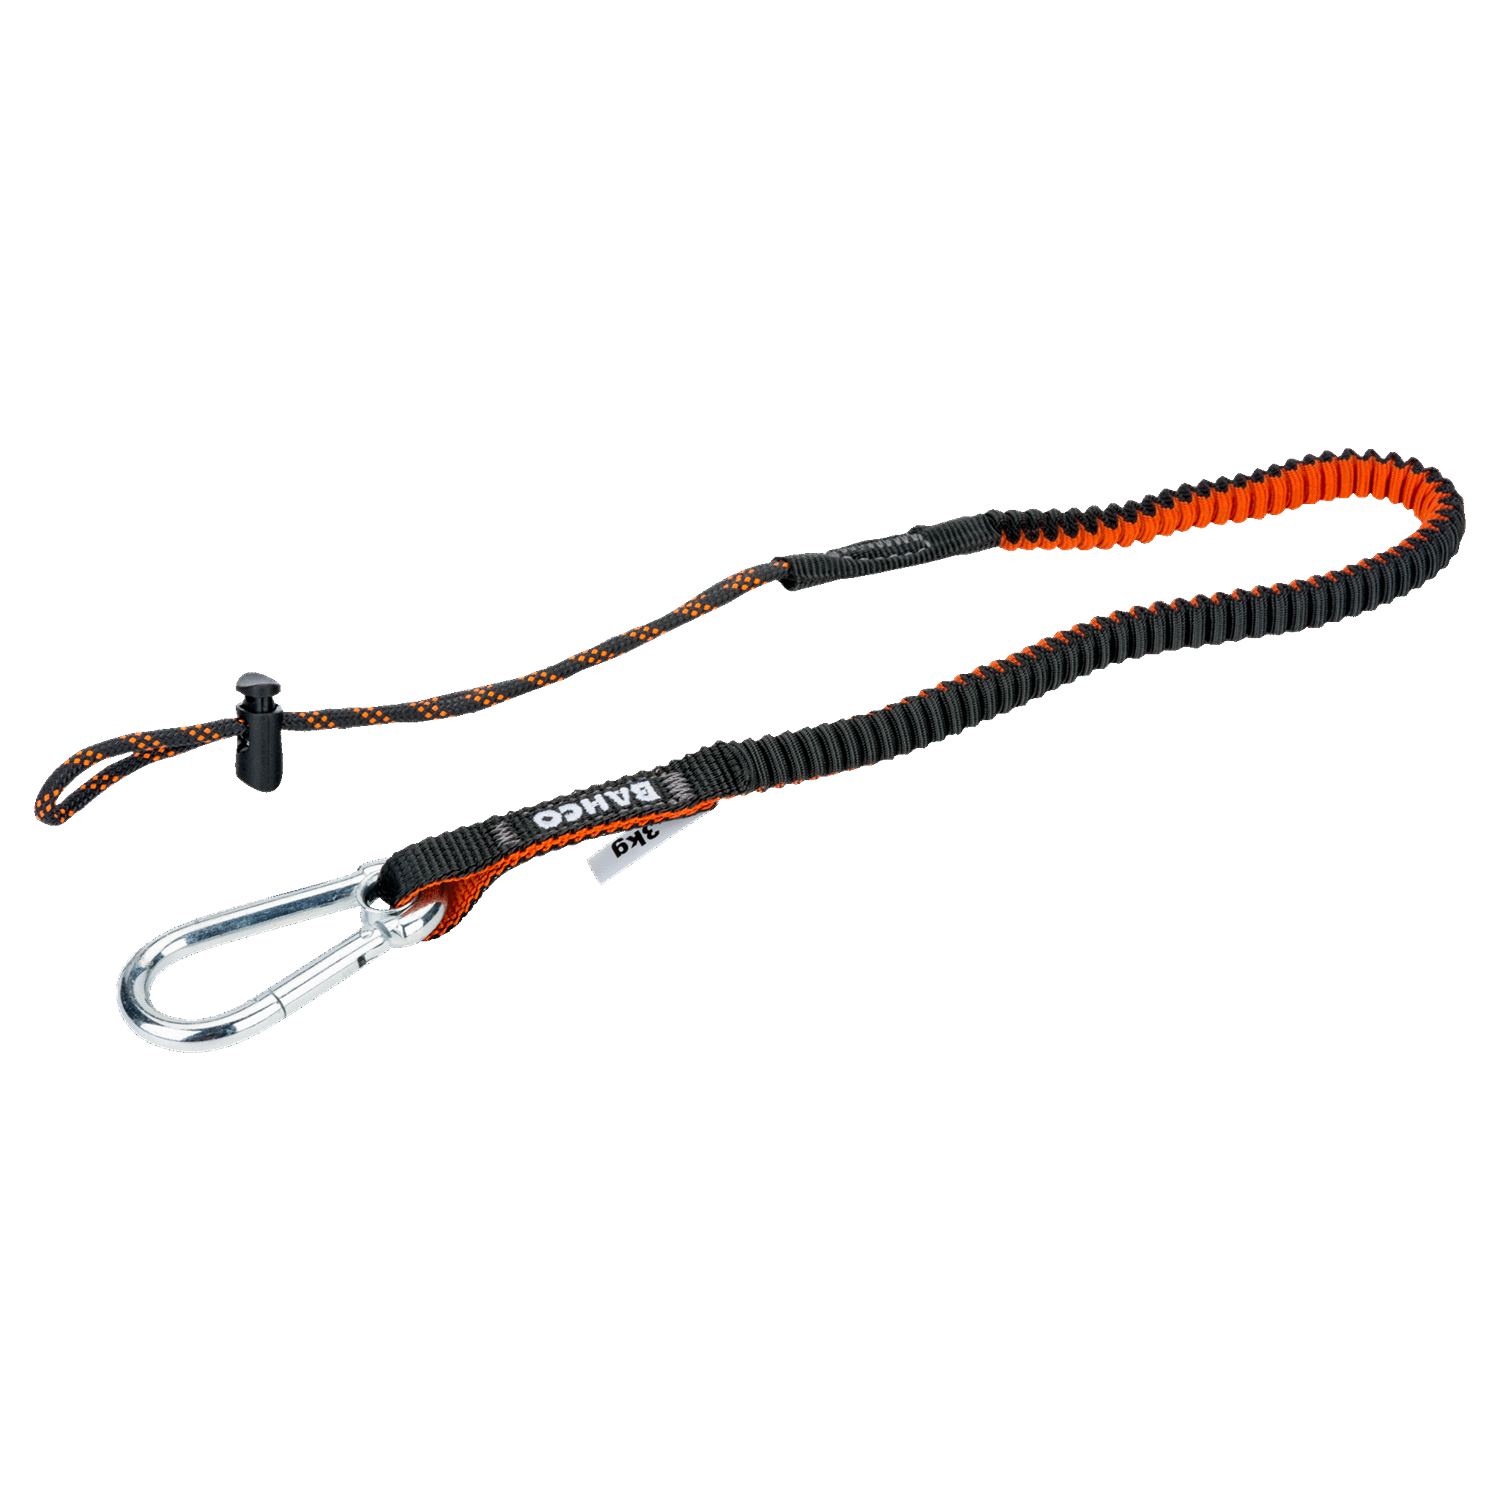 BAHCO 3875-LY2 Strap Lanyard with and Fixed Loop 3 kg - Premium Lanyard from BAHCO - Shop now at Yew Aik.